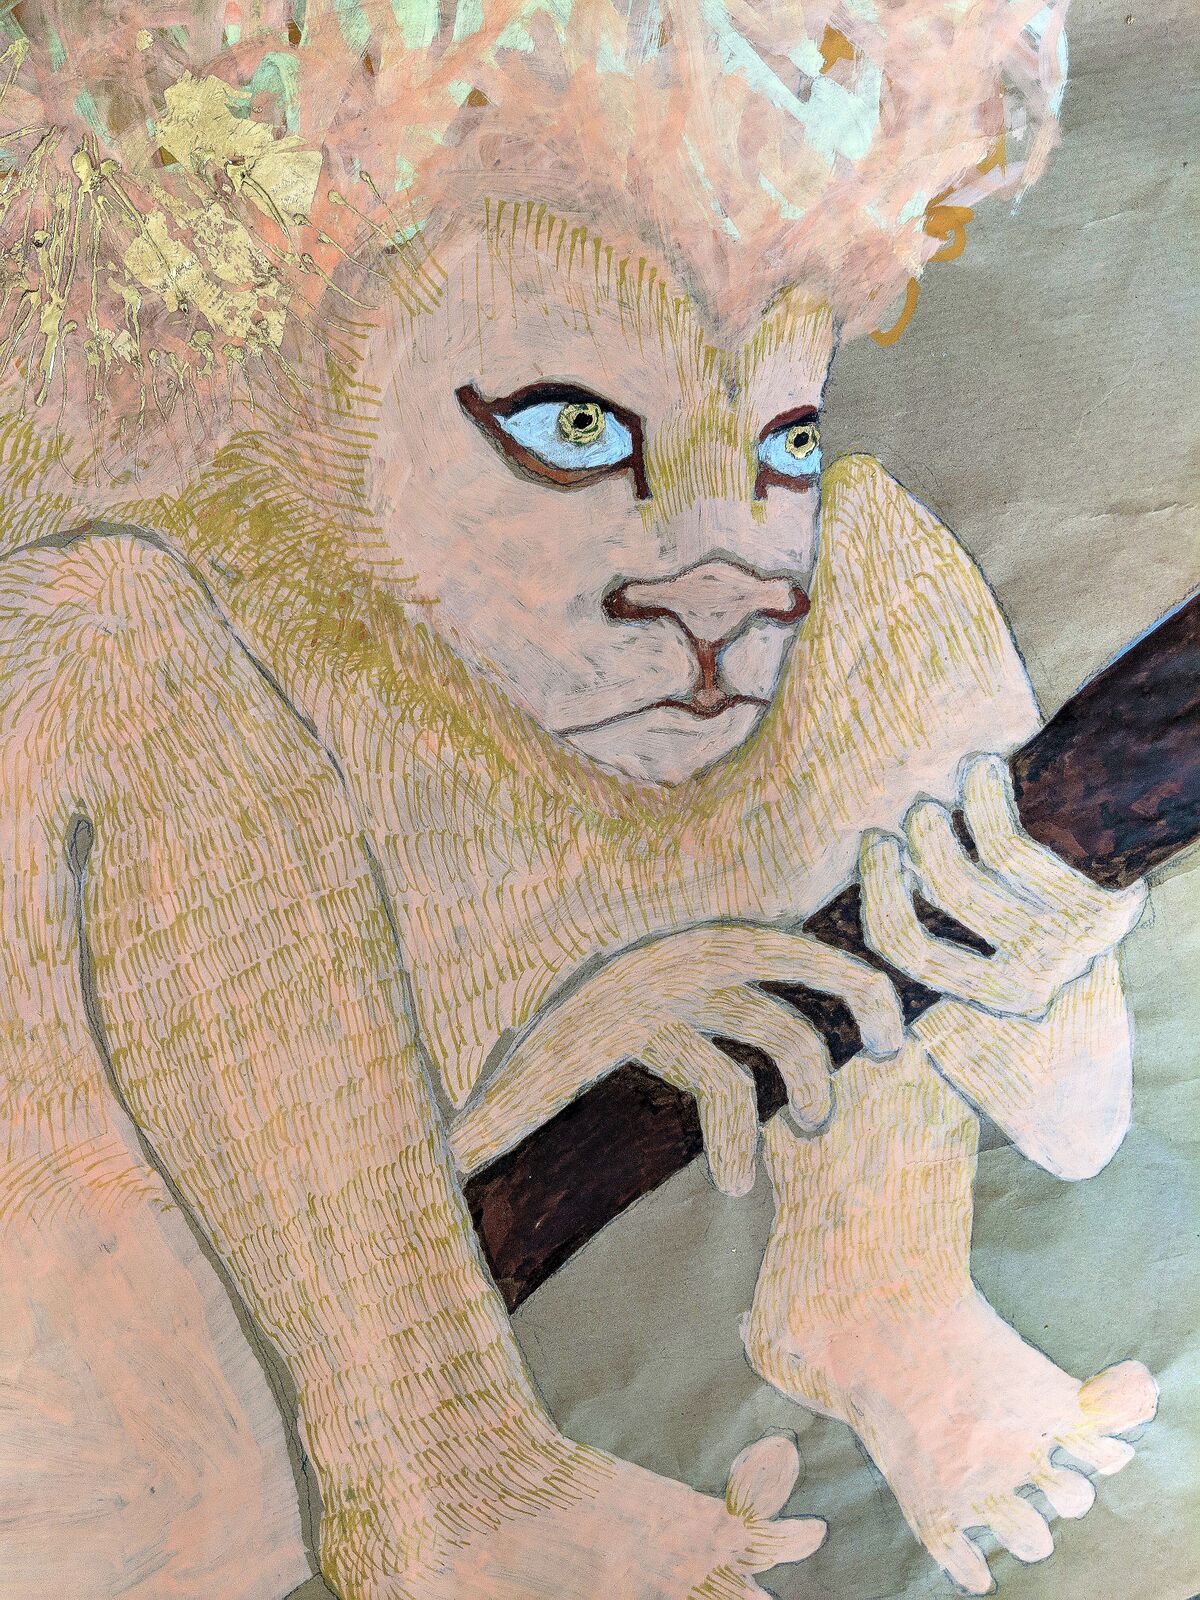 Lion with gilded fur and human-like hands and feet